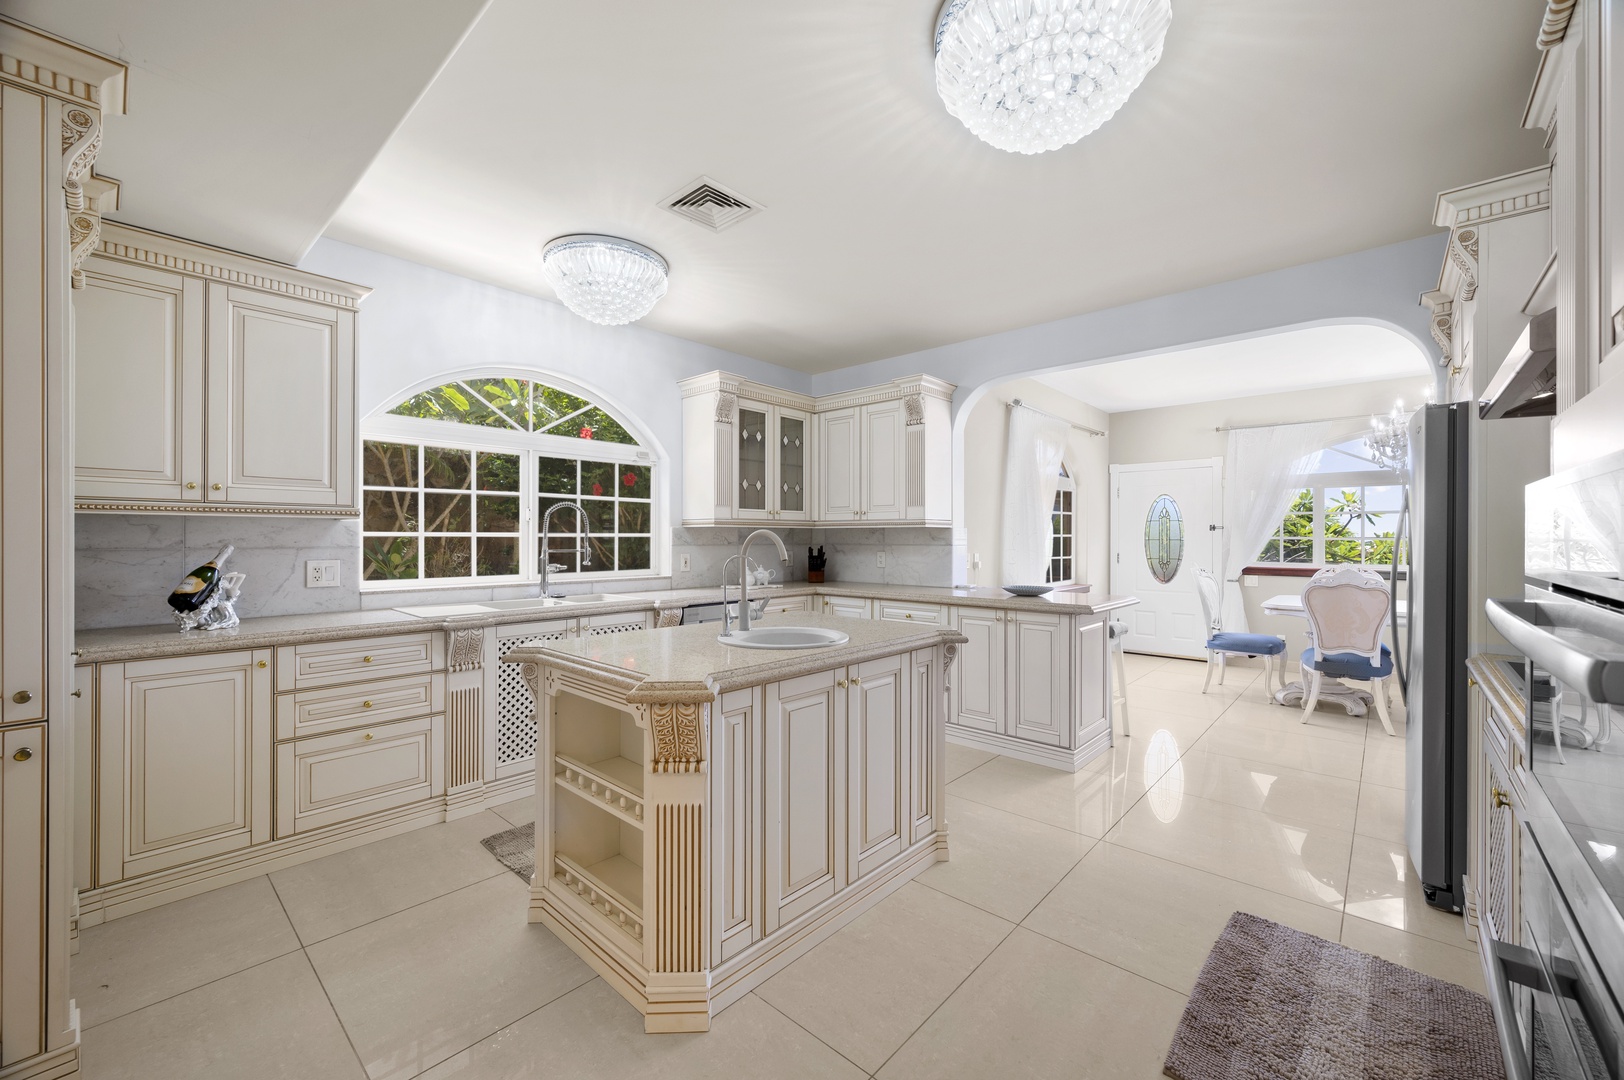 Honolulu Vacation Rentals, Lotus on a Hill* - This expansive kitchen with center island is the perfect place to prepare your favorite meals